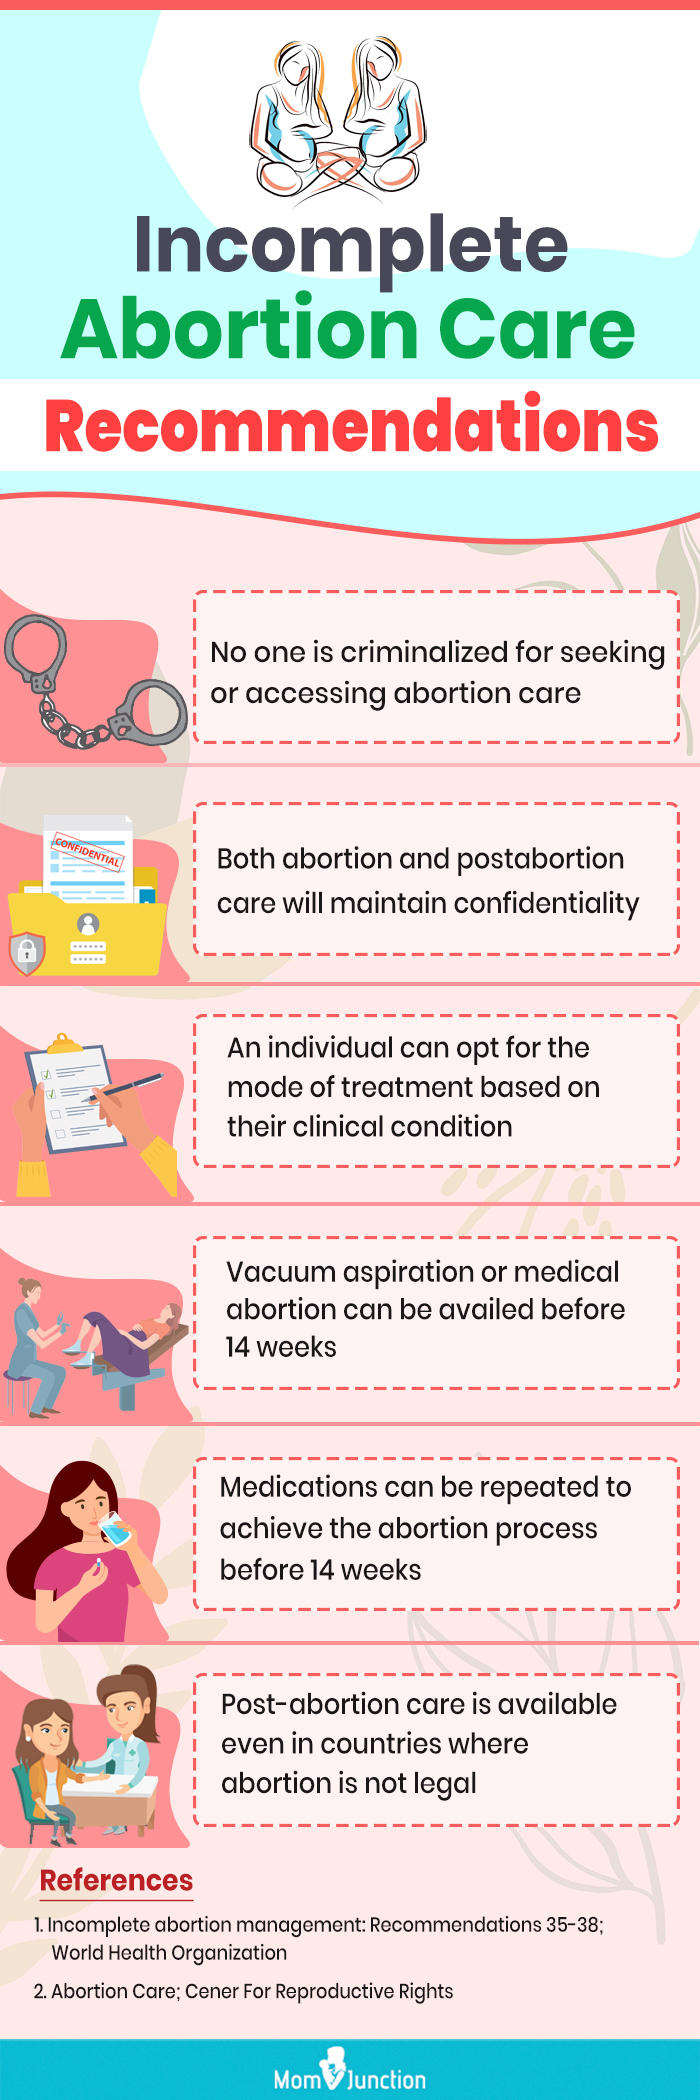 incomplete abortion care (infographic)